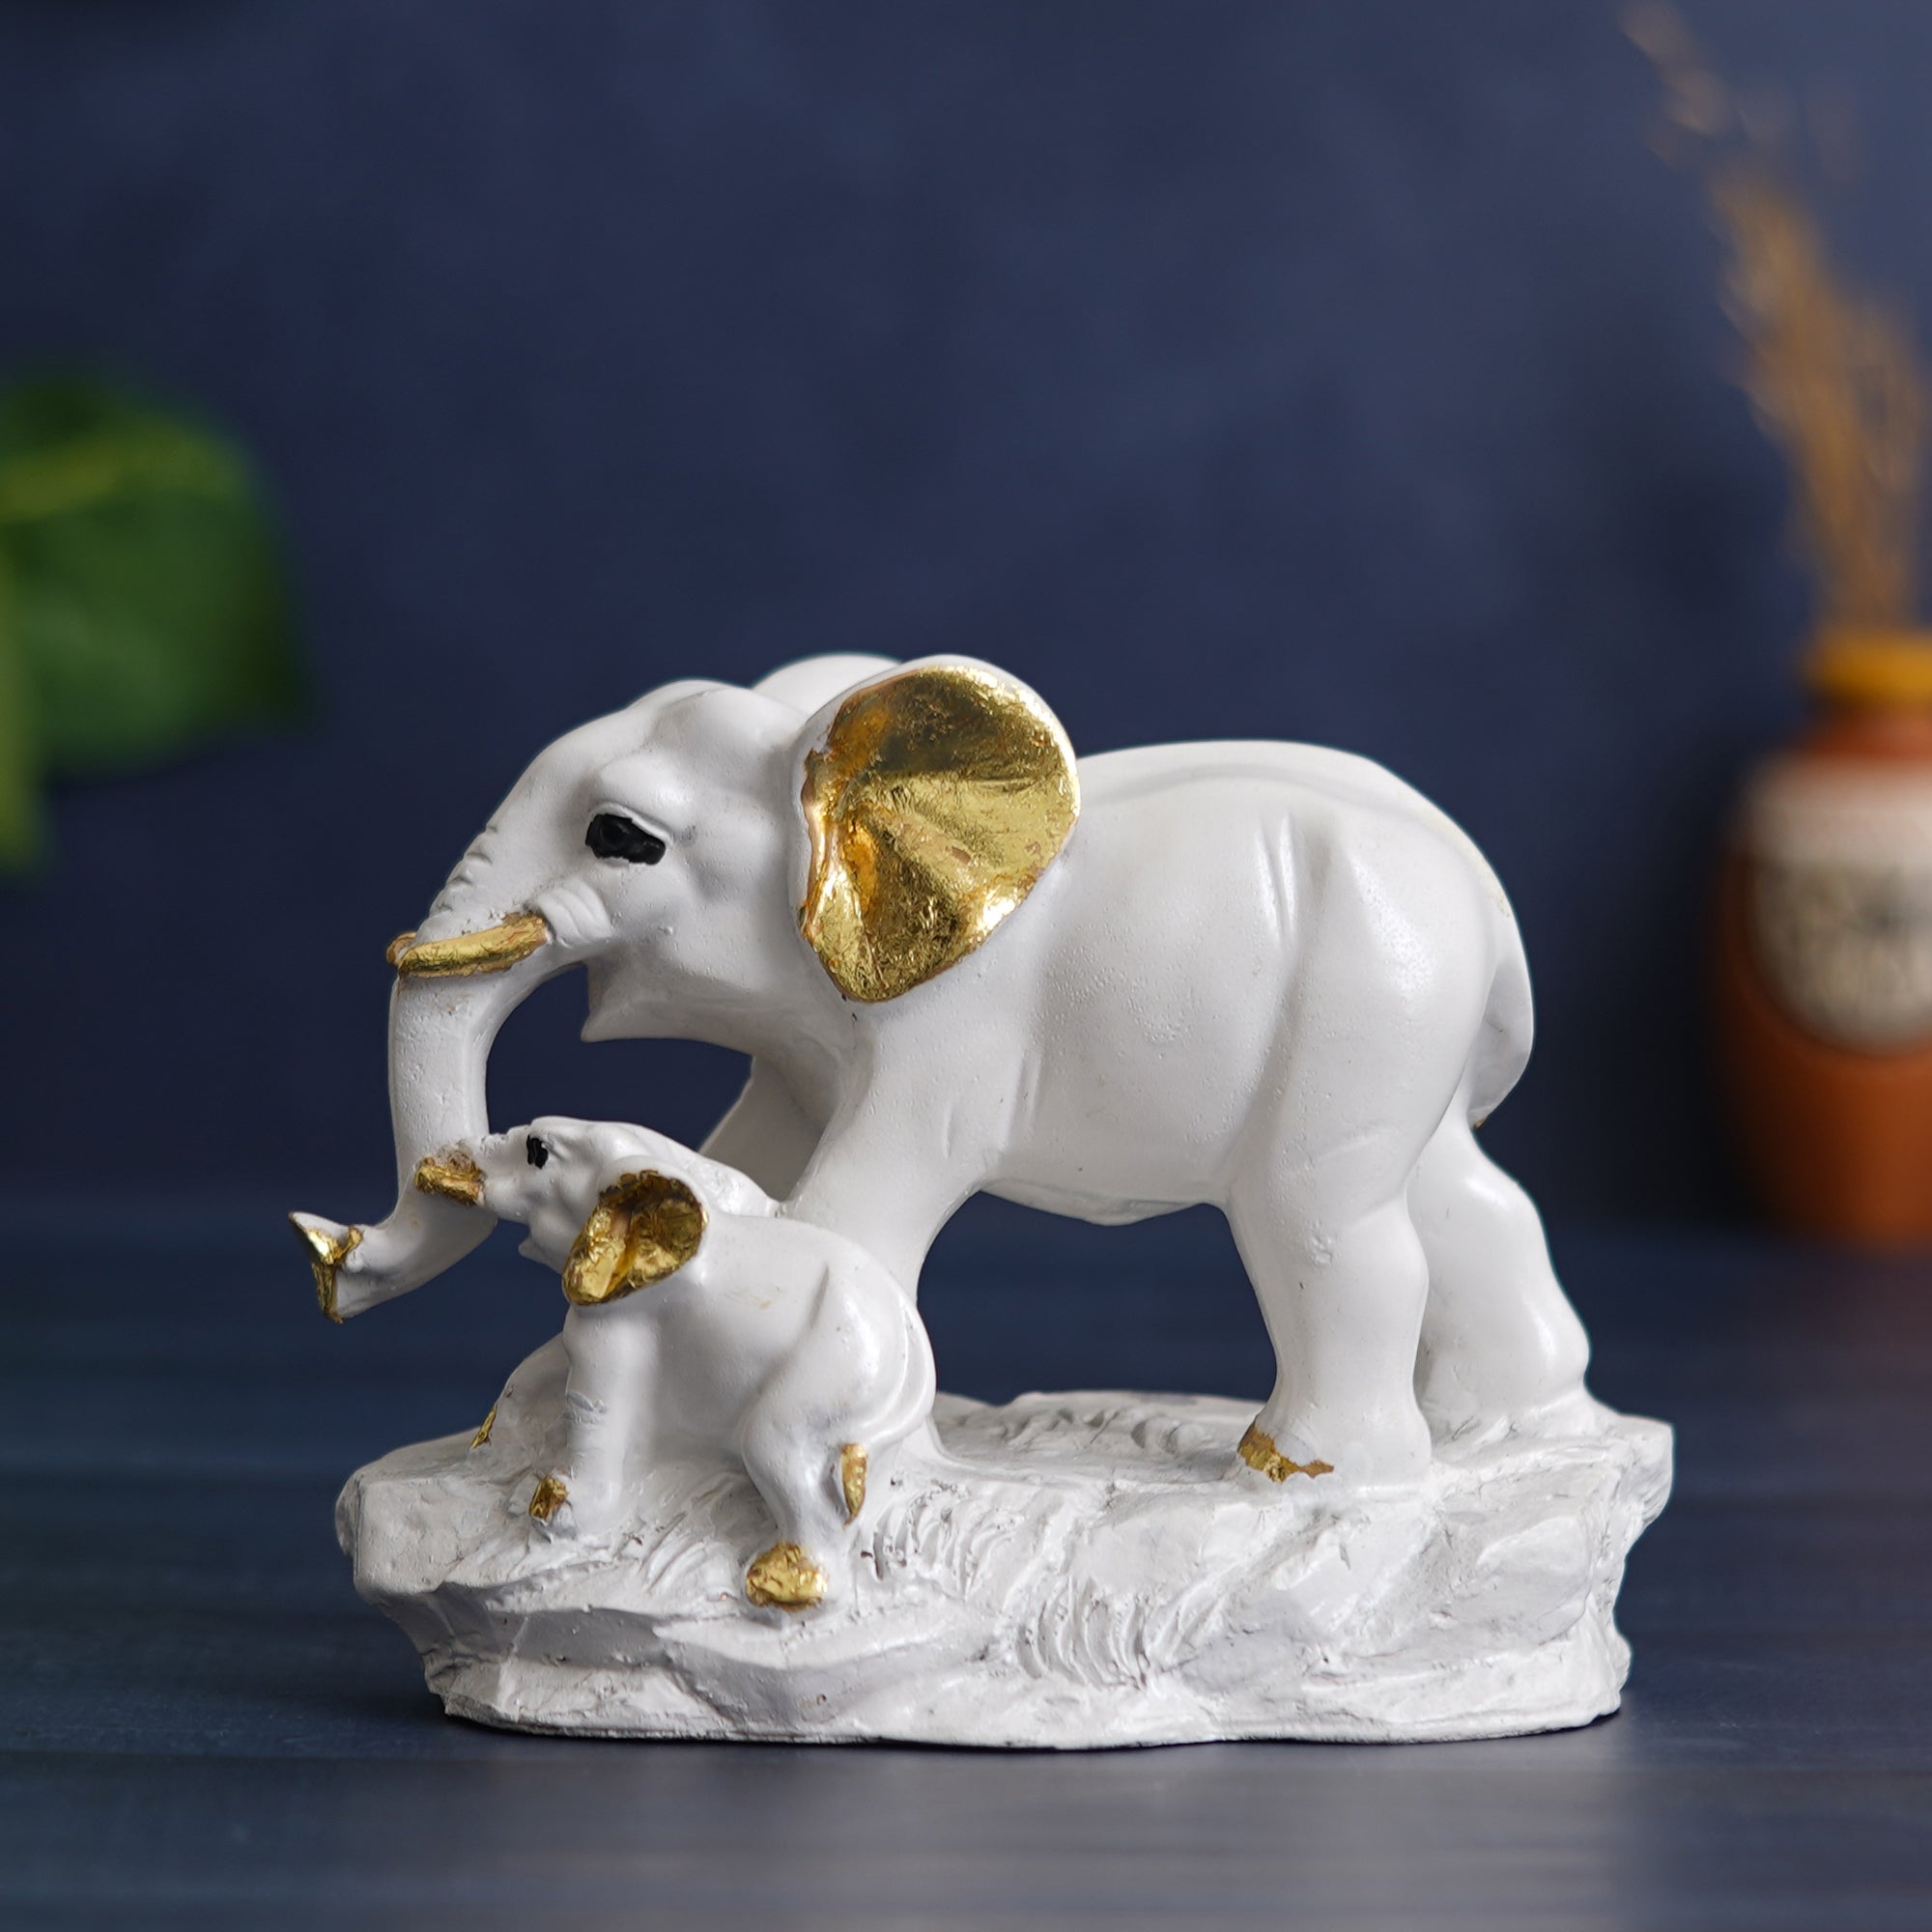 eCraftIndia White and Golden Cute Elephant with Baby Elephant Statues Animal Figurines Decorative Showpieces for Home Decor